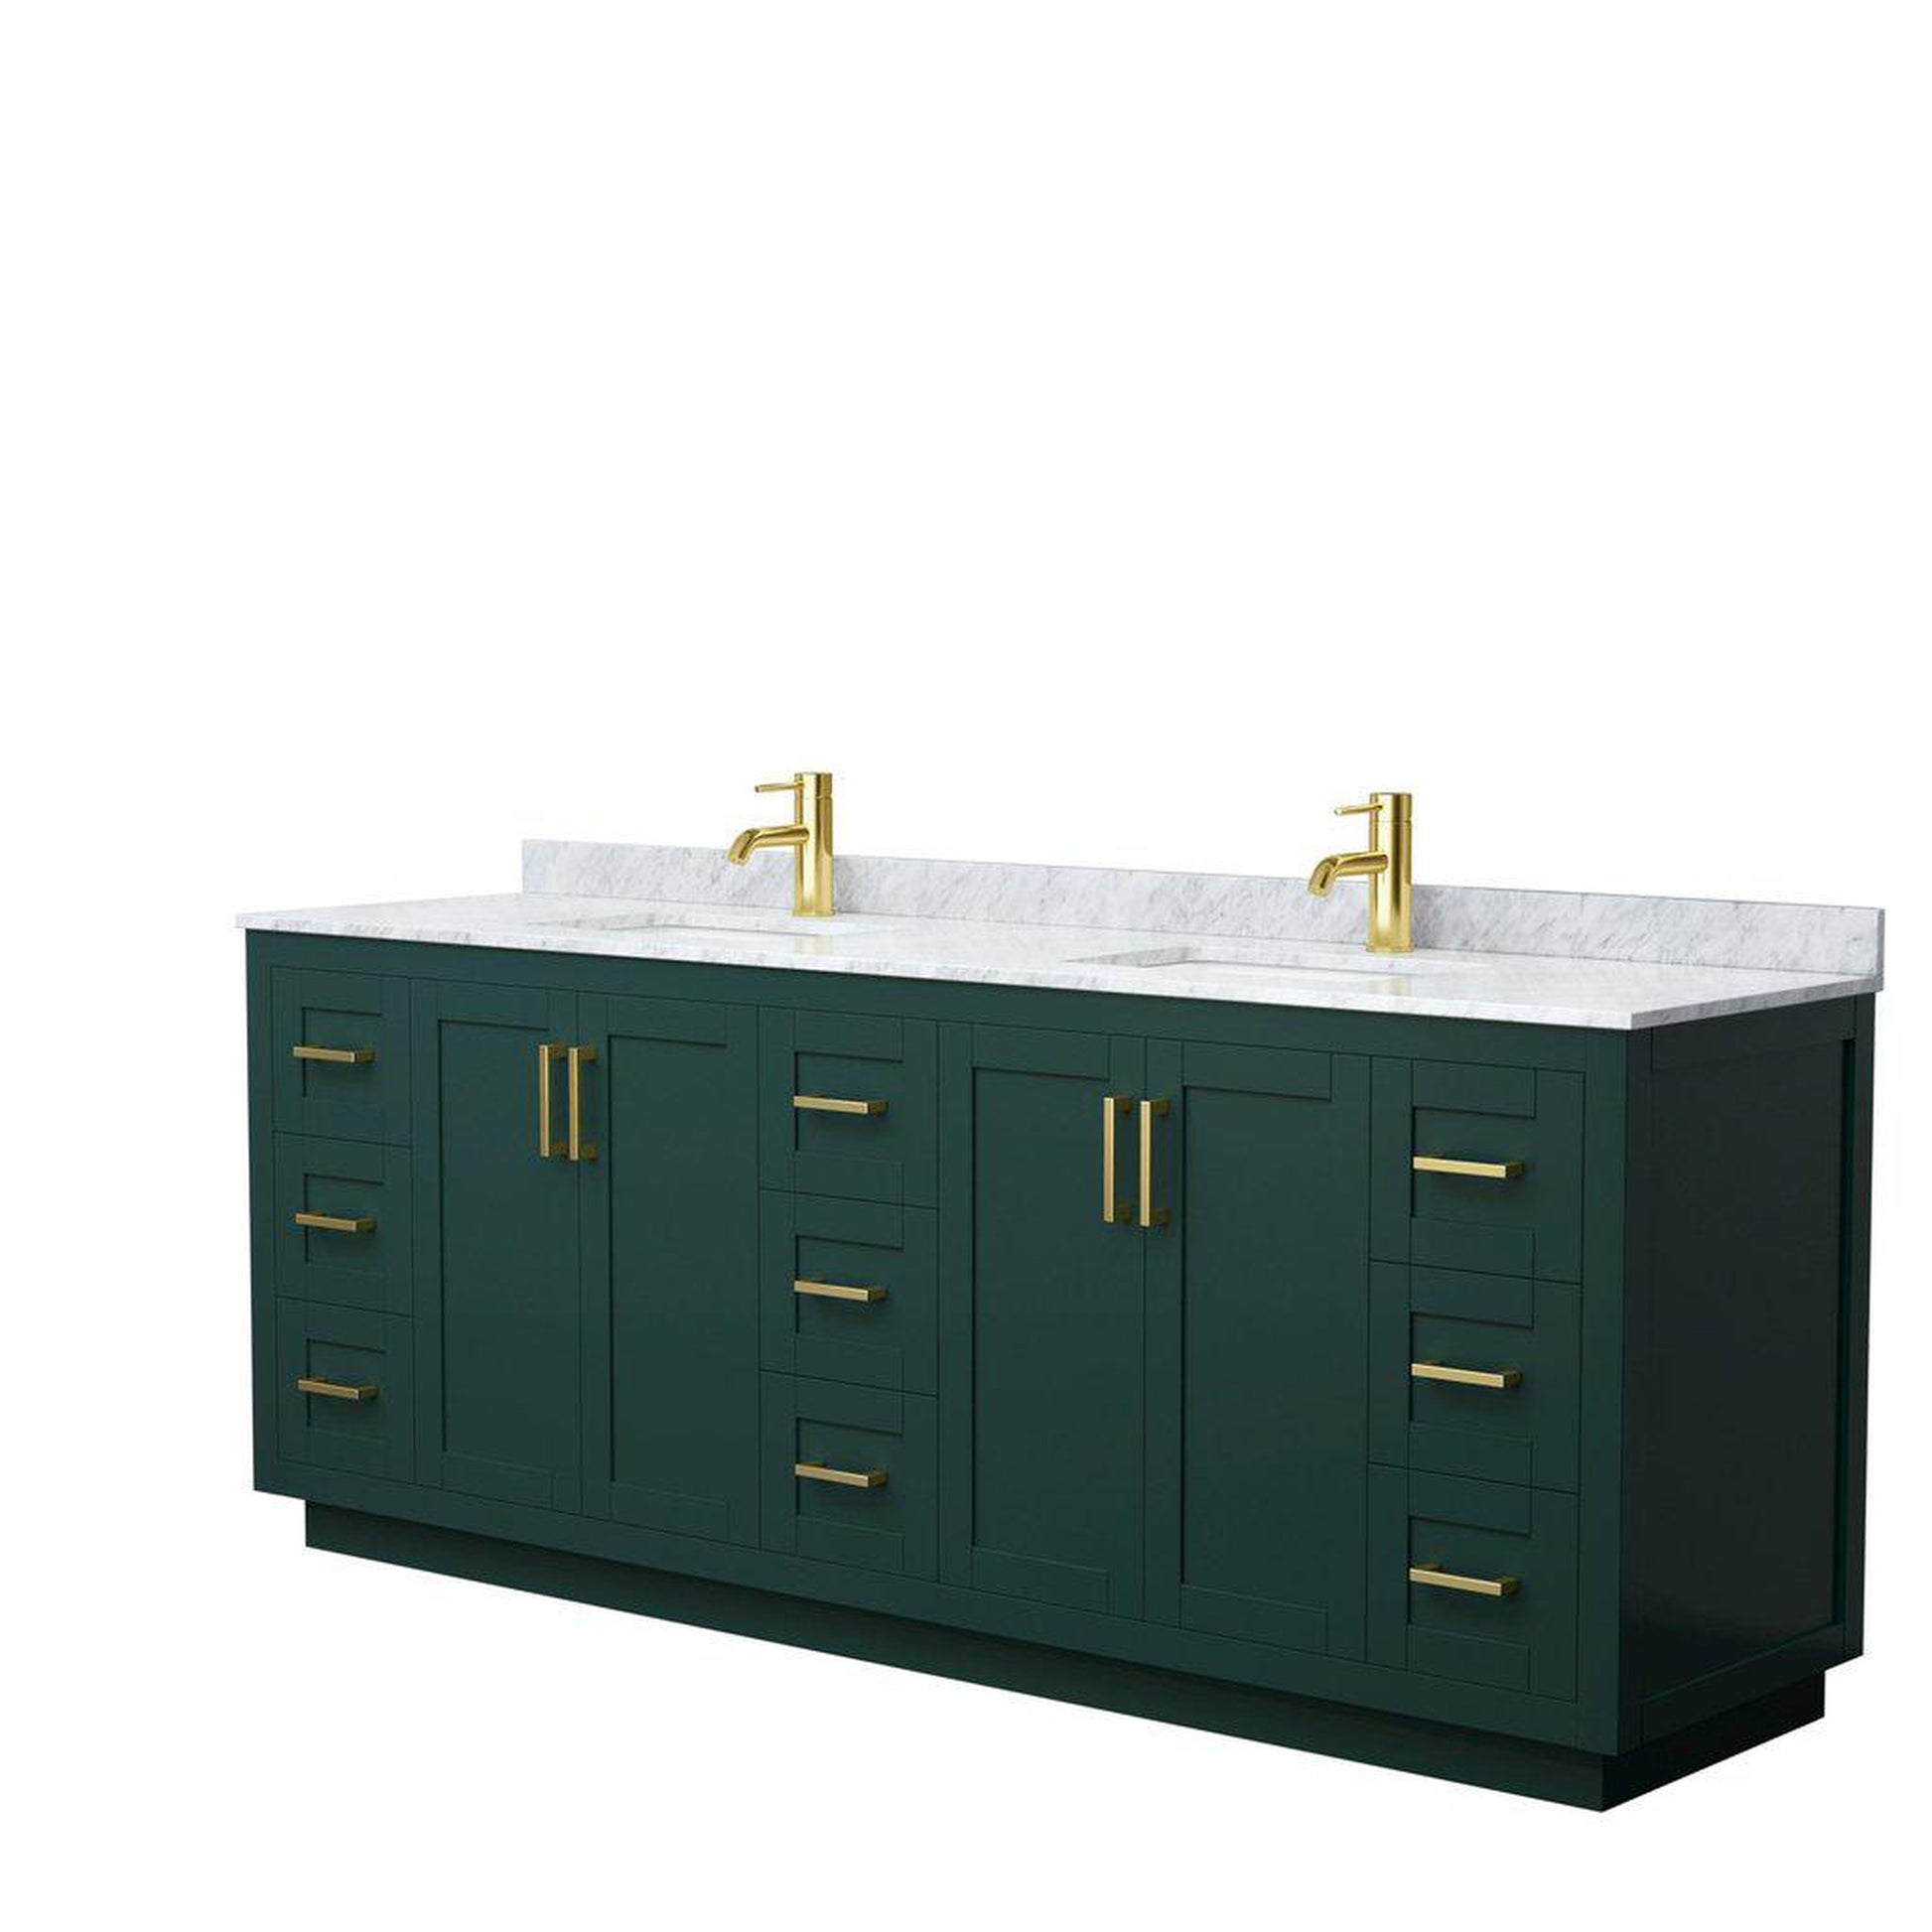 Wyndham Collection Miranda 84" Double Bathroom Green Vanity Set With White Carrara Marble Countertop, Undermount Square Sink, And Brushed Gold Trim